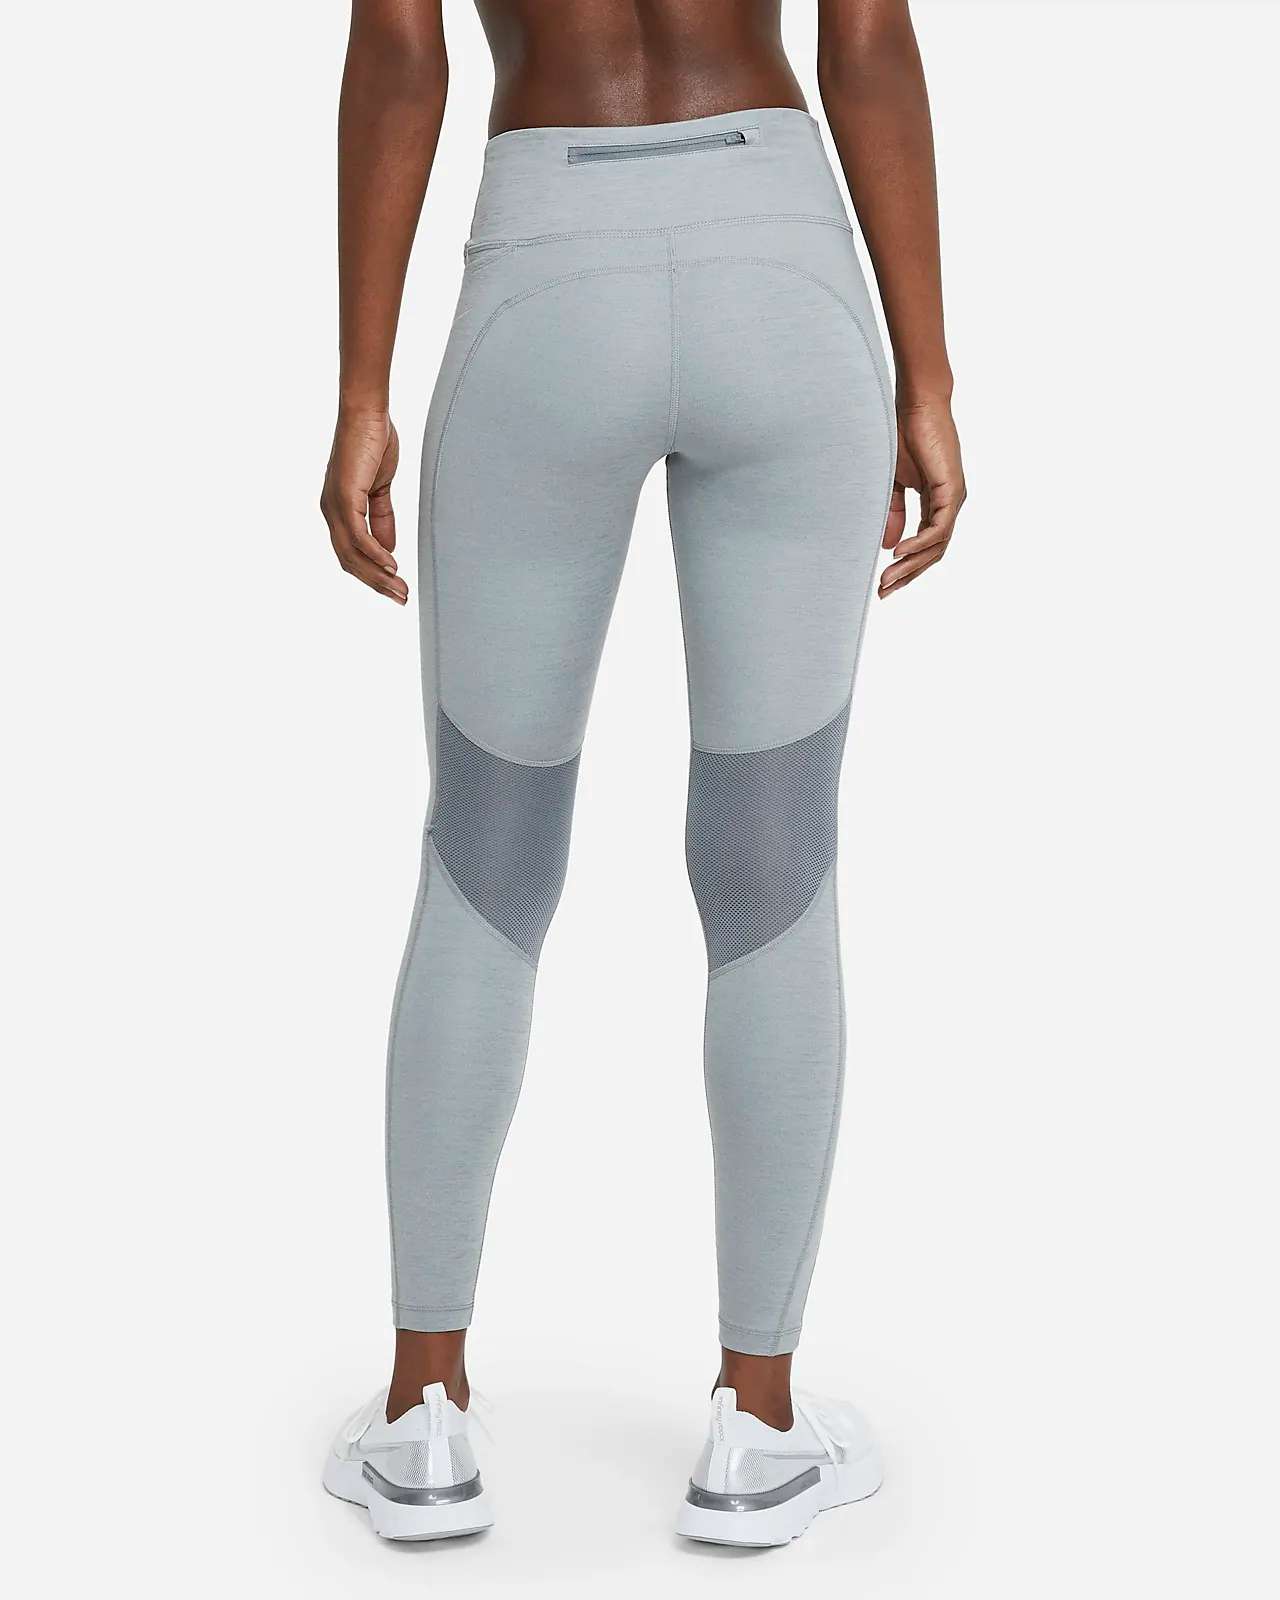 Running leggings women are essential gear for women who love to hit the pavement, treadmill, or trail. Not only do they provide comfort